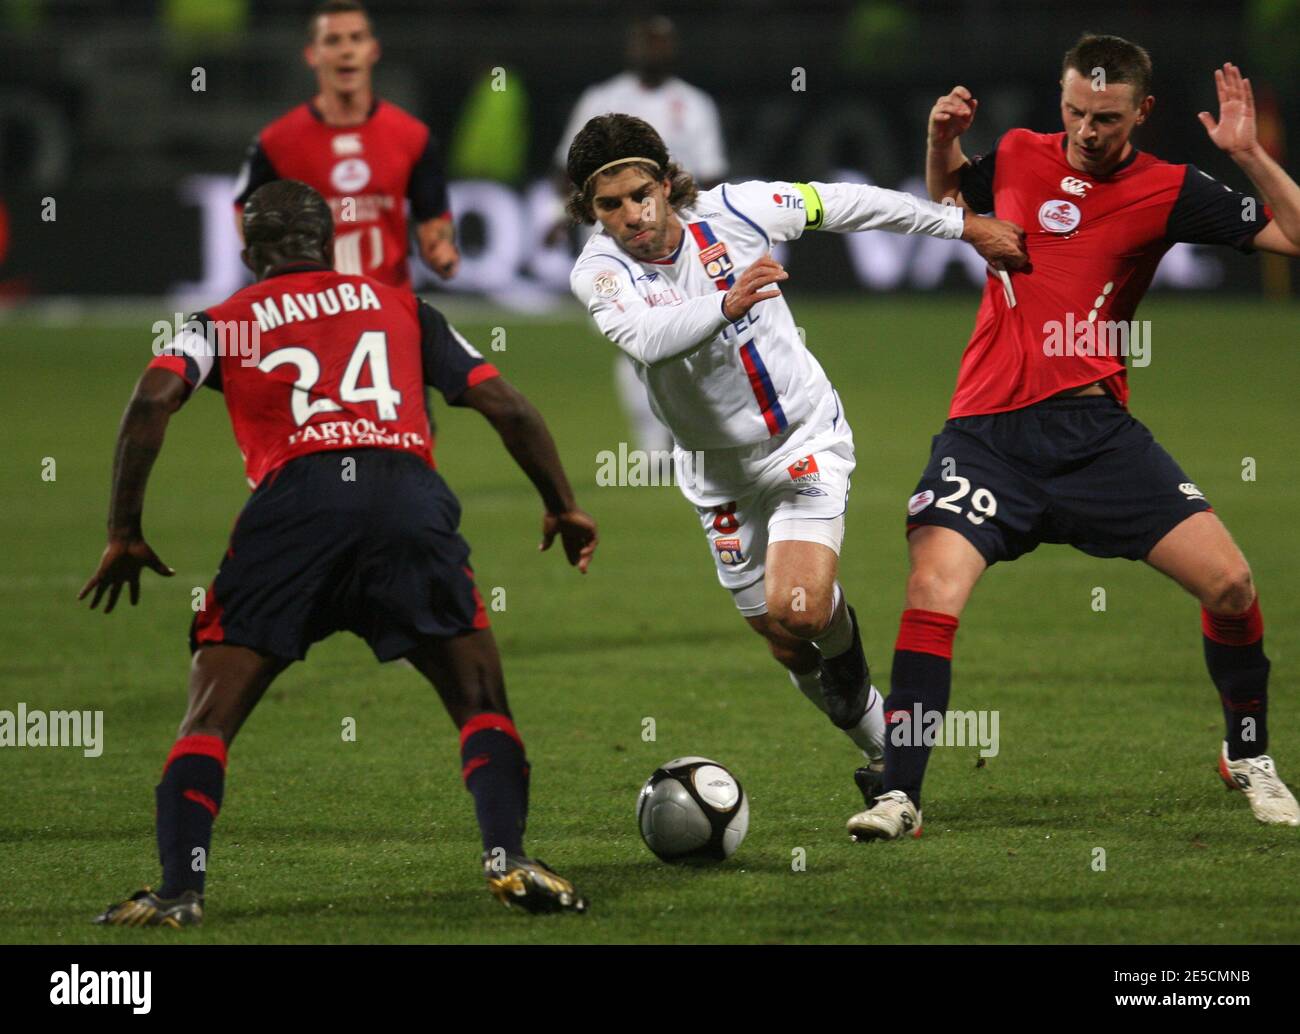 Lyon's Pernambucano Juninho during the French Premier League soccer match, Olympique Lyonnais vs Lille olympique sporting club in Lyon, France on October 18, 2008. The match ended in a 2-2 draw. Photos by Vincent Dargent/Cameleon/ABACAPRESS.COM Stock Photo